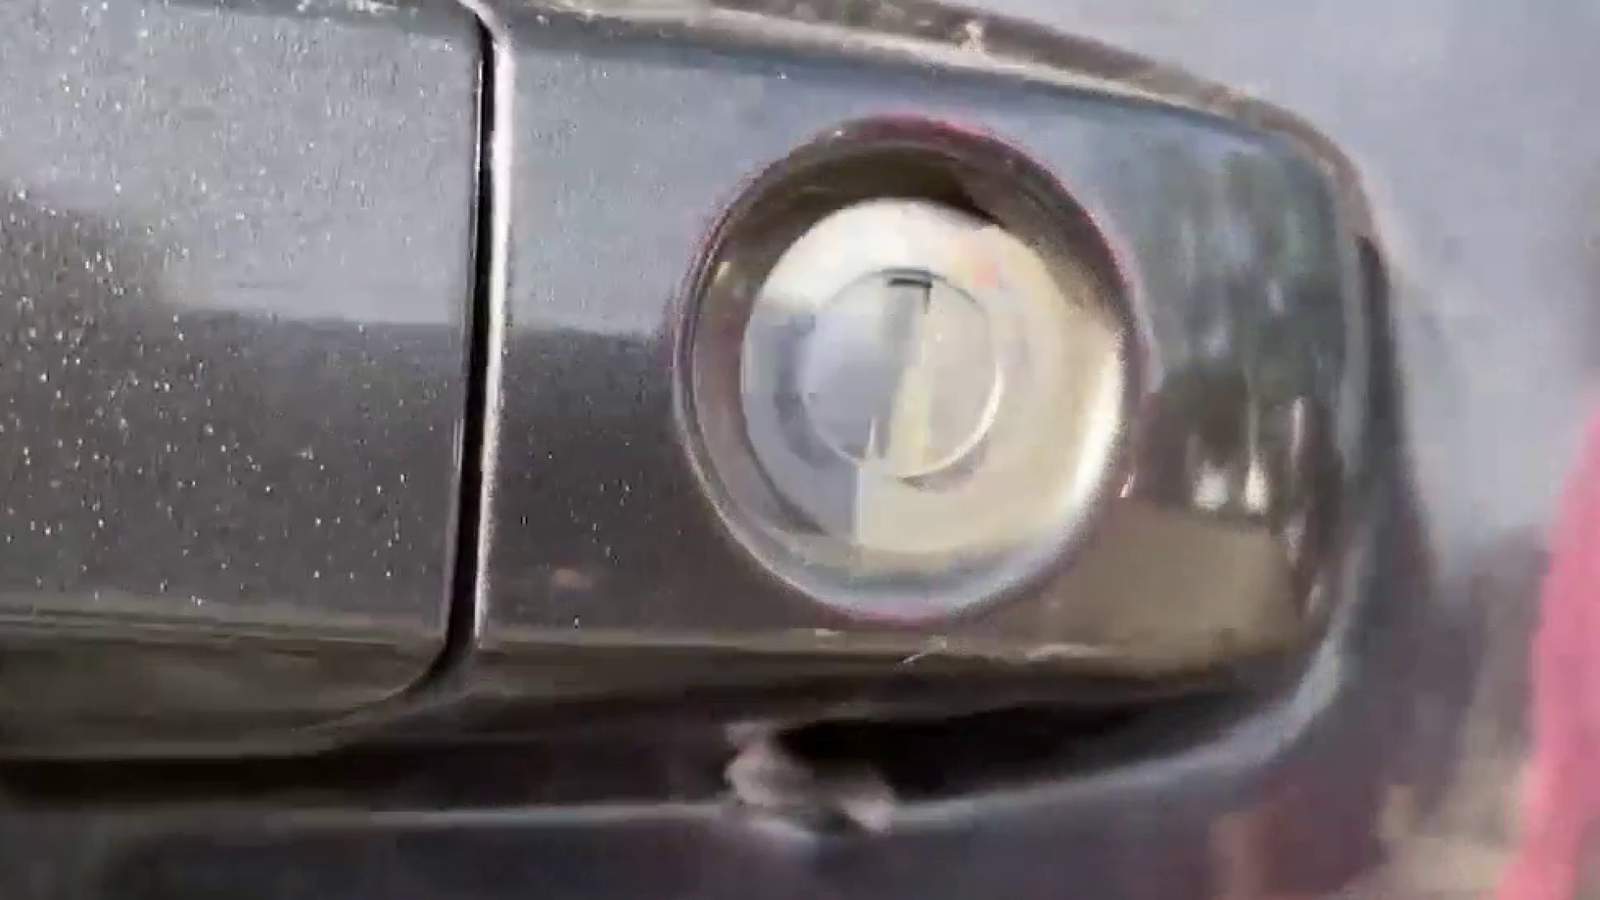 Bicyclist says burglars are ‘hole punching’ their way into vehicles in the area